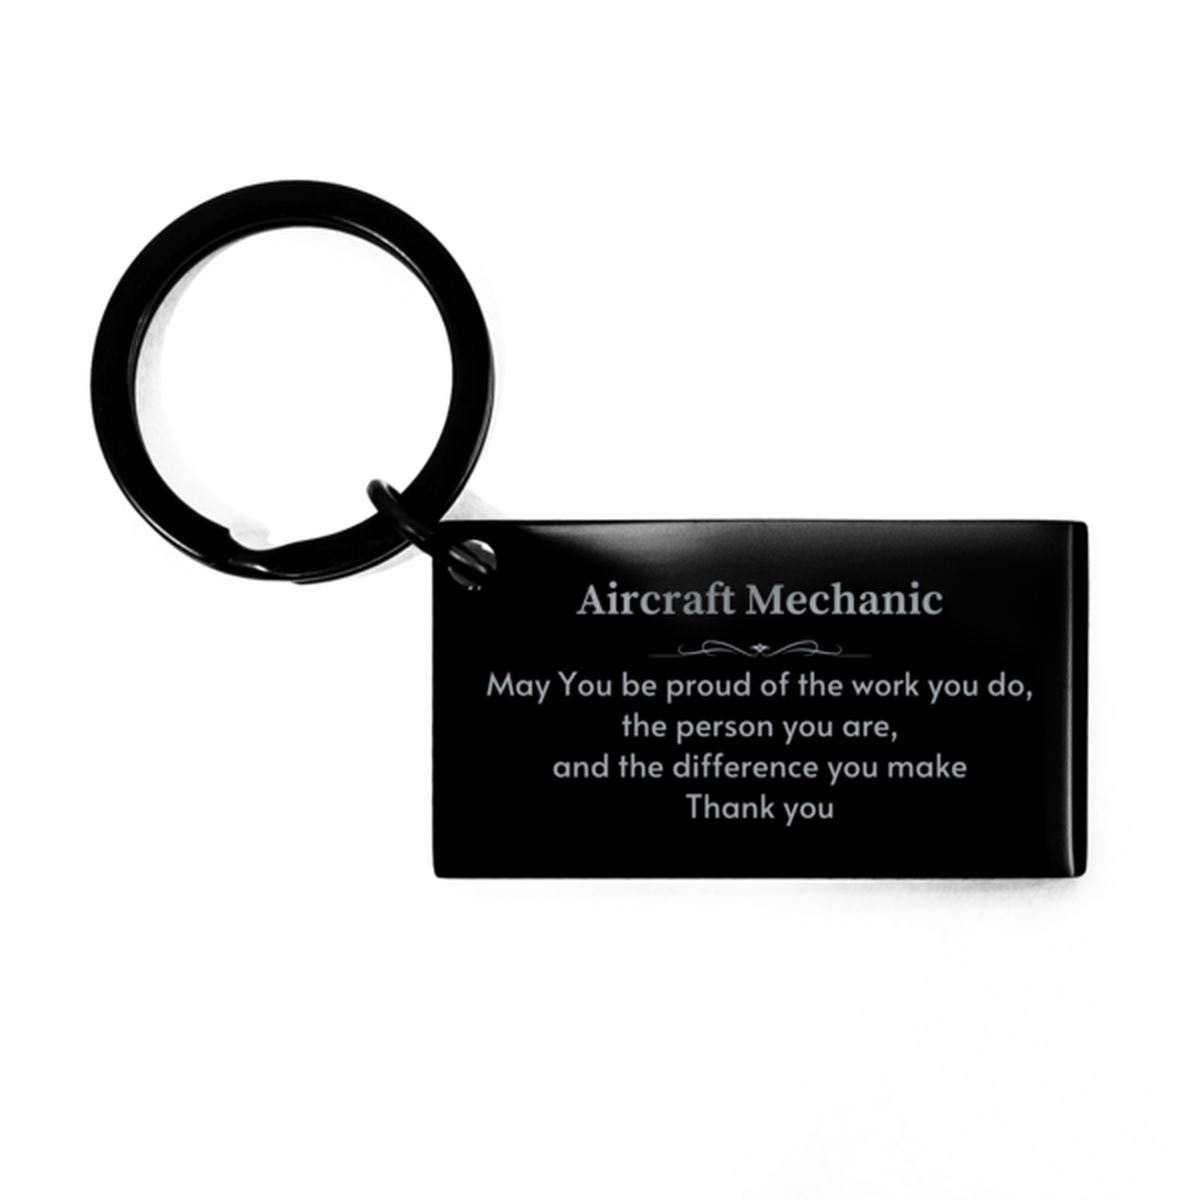 Heartwarming Keychain Retirement Coworkers Gifts for Aircraft Mechanic, Childcare Worker May You be proud of the work you do, the person you are Gifts for Boss Men Women Friends